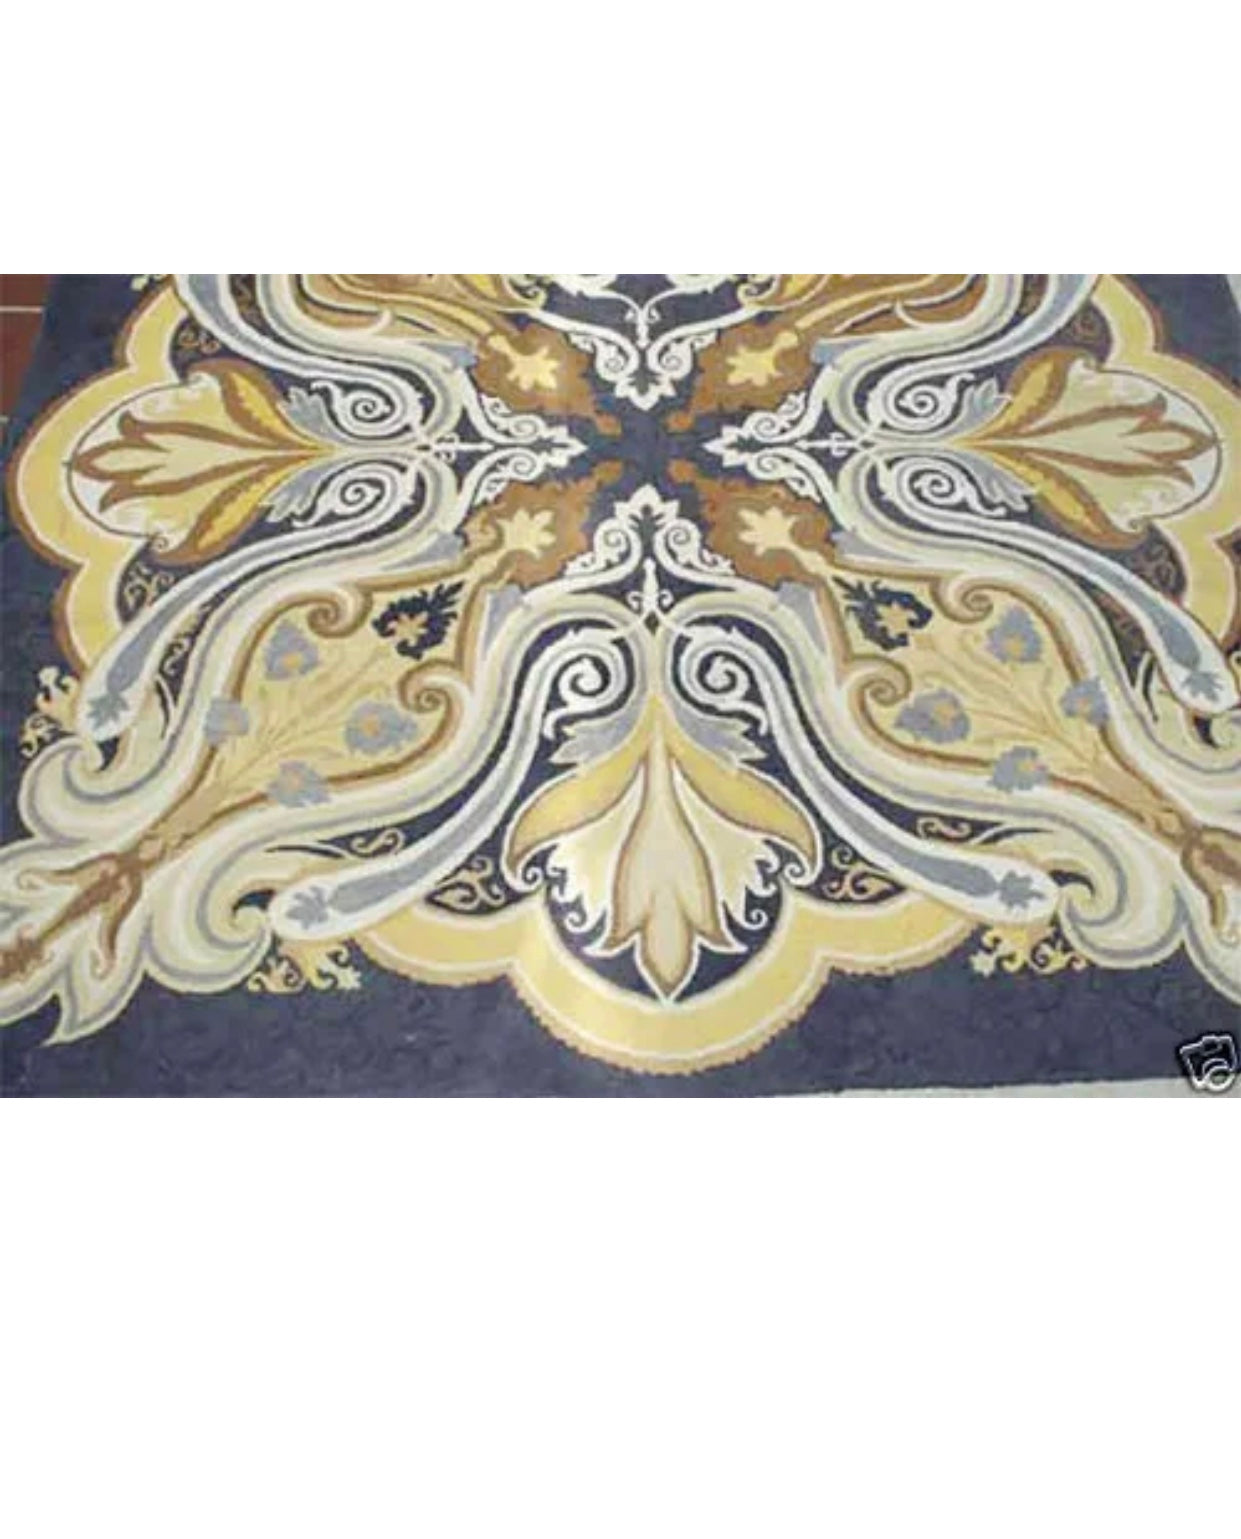 A 2nd To None Antique  Art Nouveau/ Art Deco American Hooked Rug